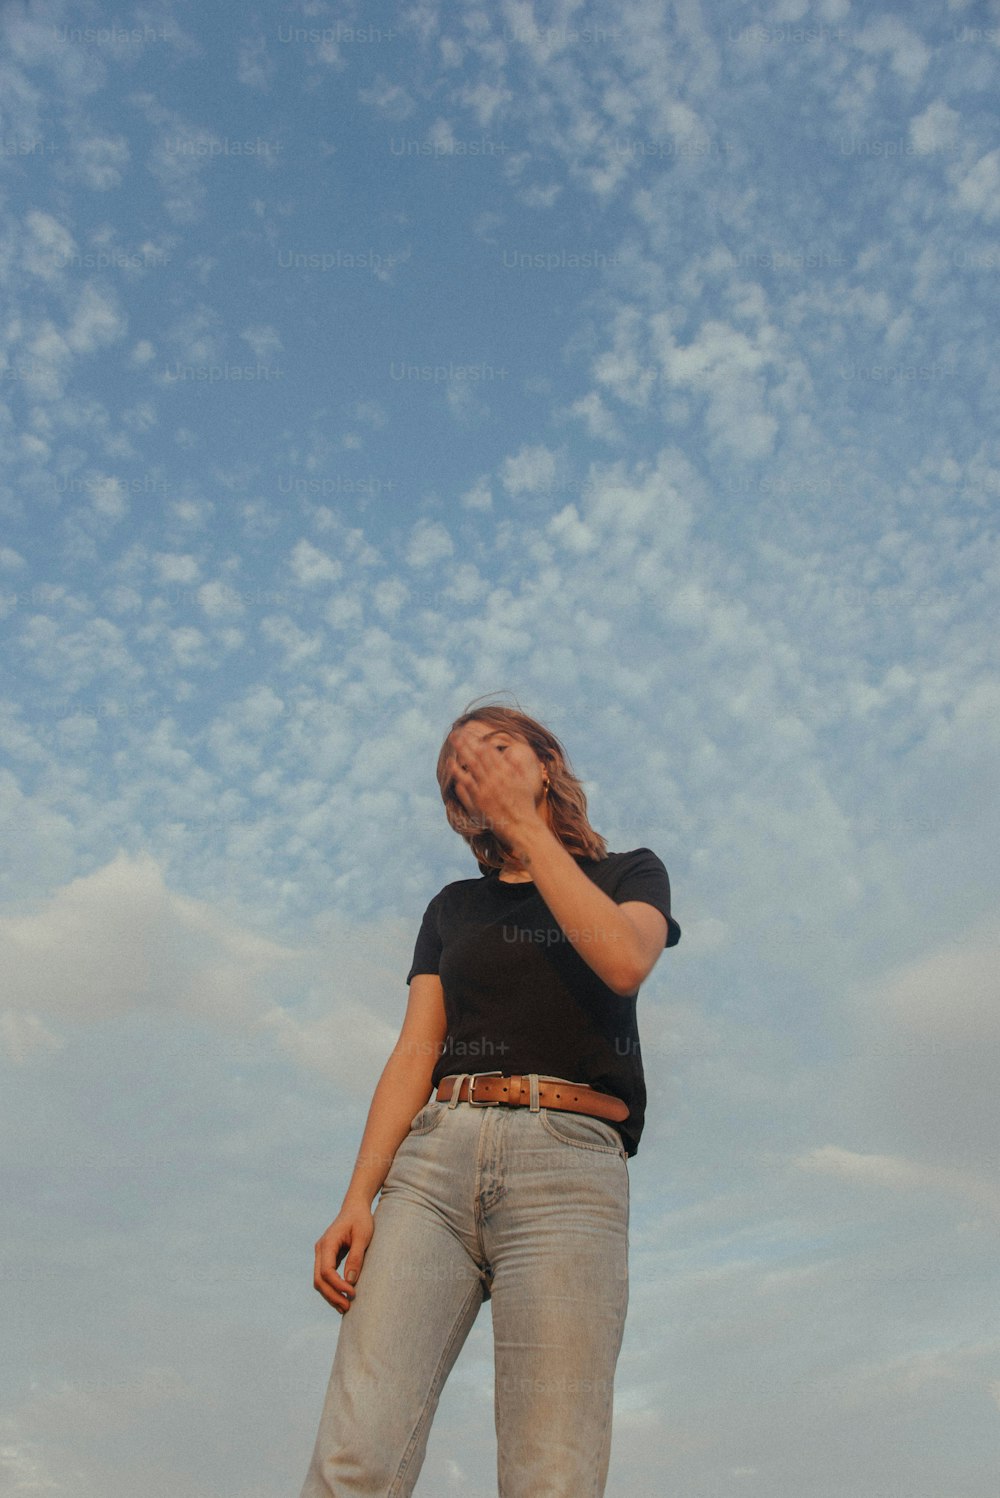 a person standing in front of a cloudy sky